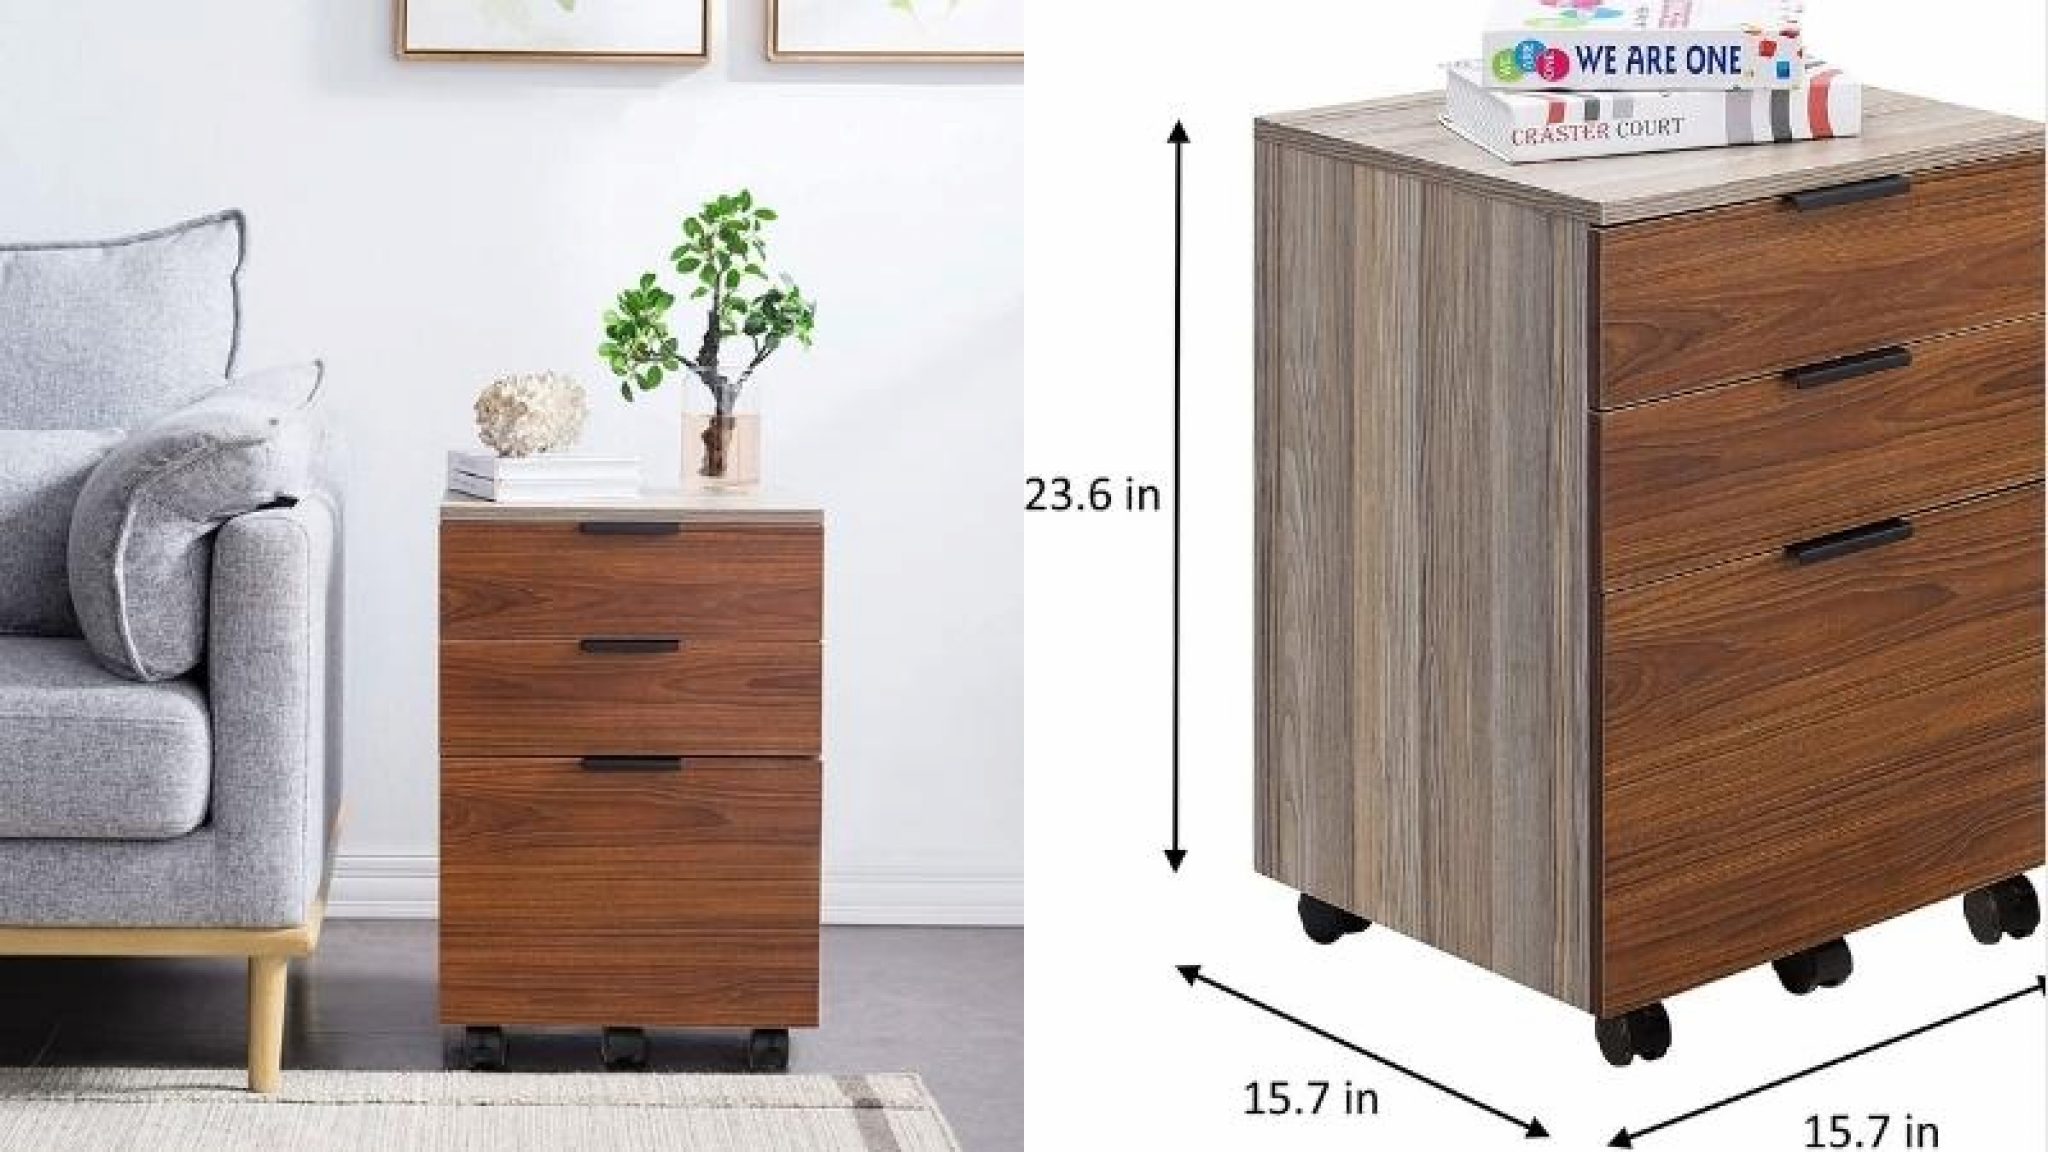 8 IKEA Alex Drawer Alternative The Perfect Solution for Small Spaces